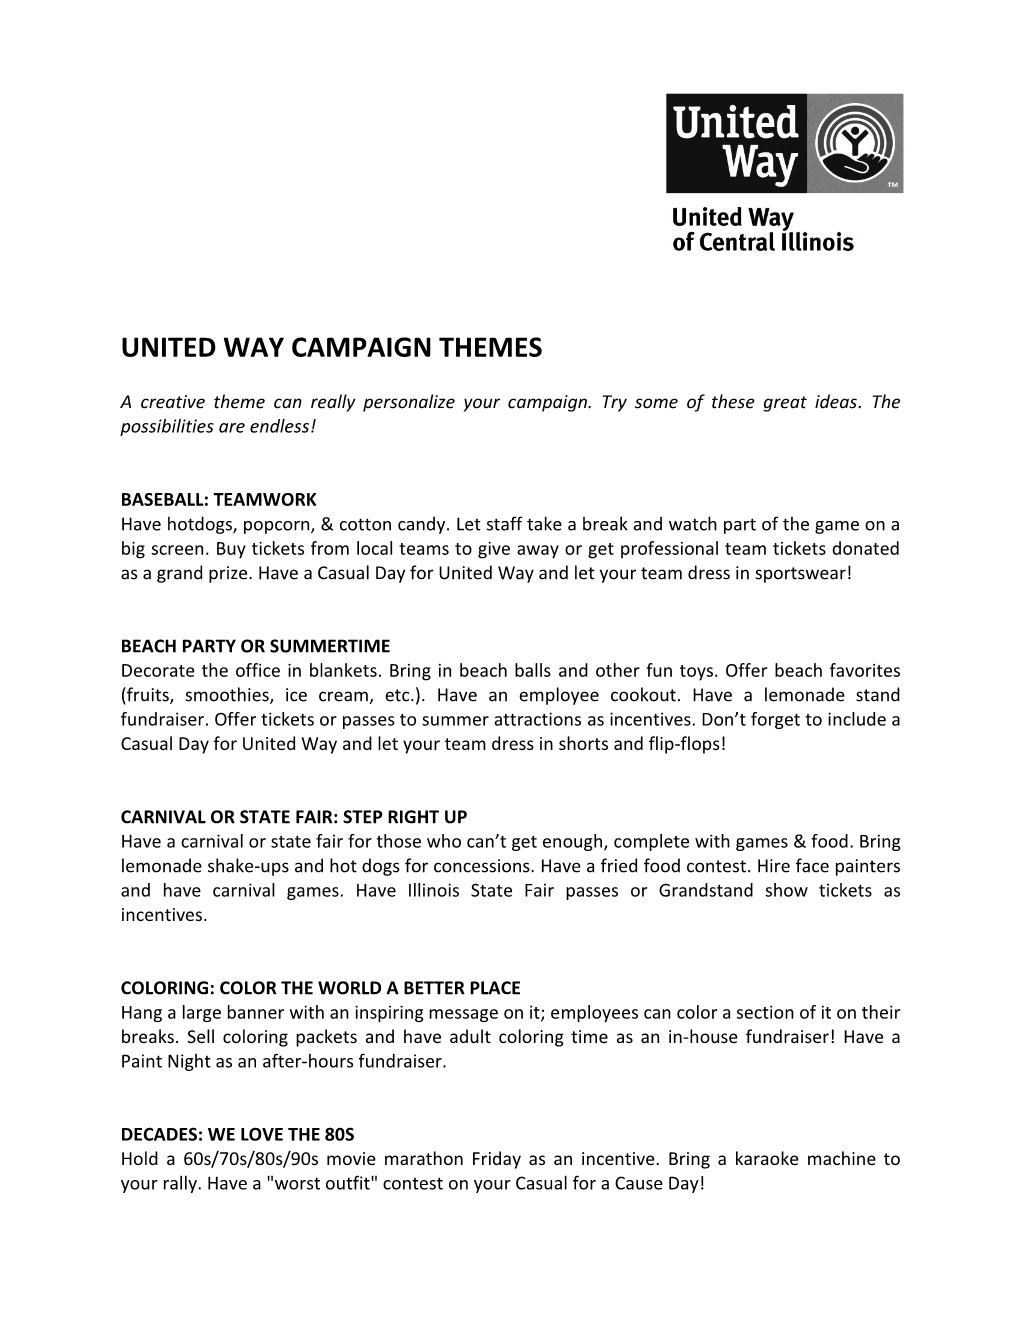 United Way Campaign Themes